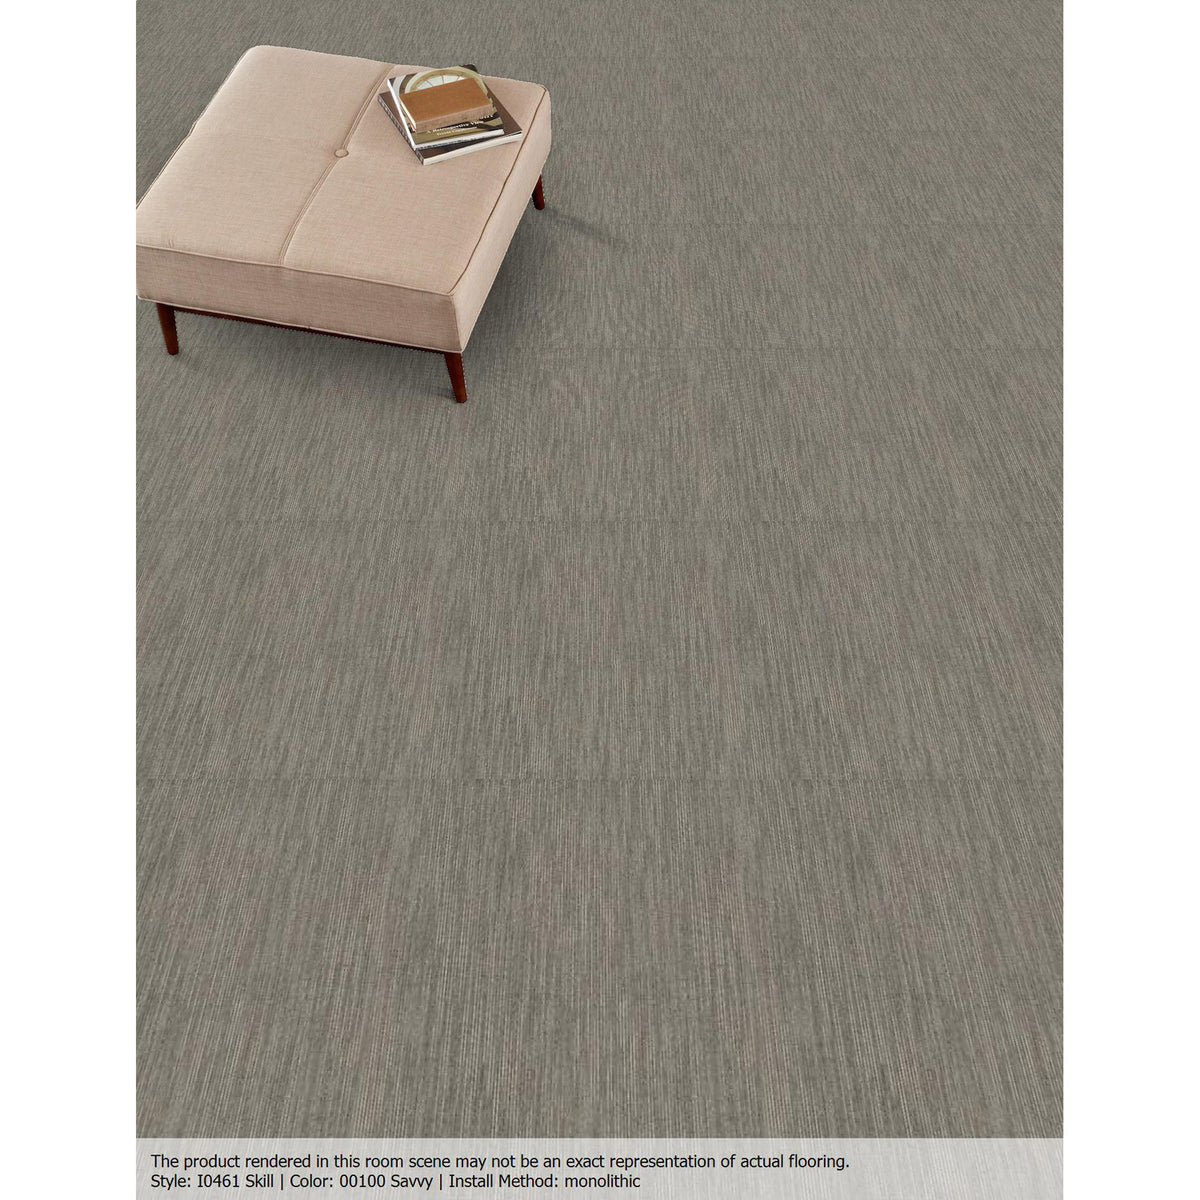 Patcraft – Rational Collection – Skill Carpet Tile – Savvy